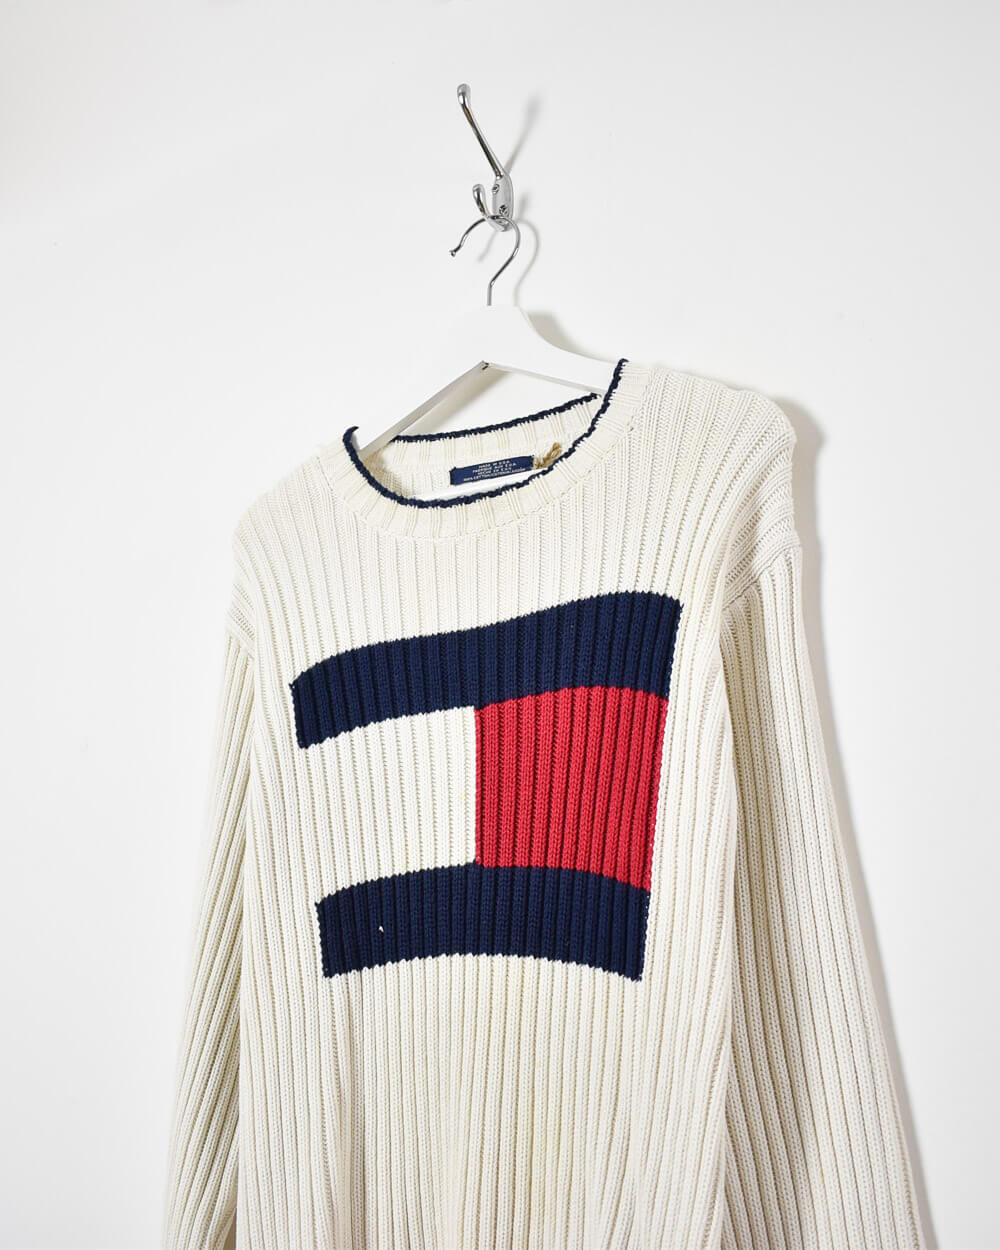 Tommy Hilfiger Knitted Sweatshirt - Medium - Domno Vintage 90s, 80s, 00s Retro and Vintage Clothing 